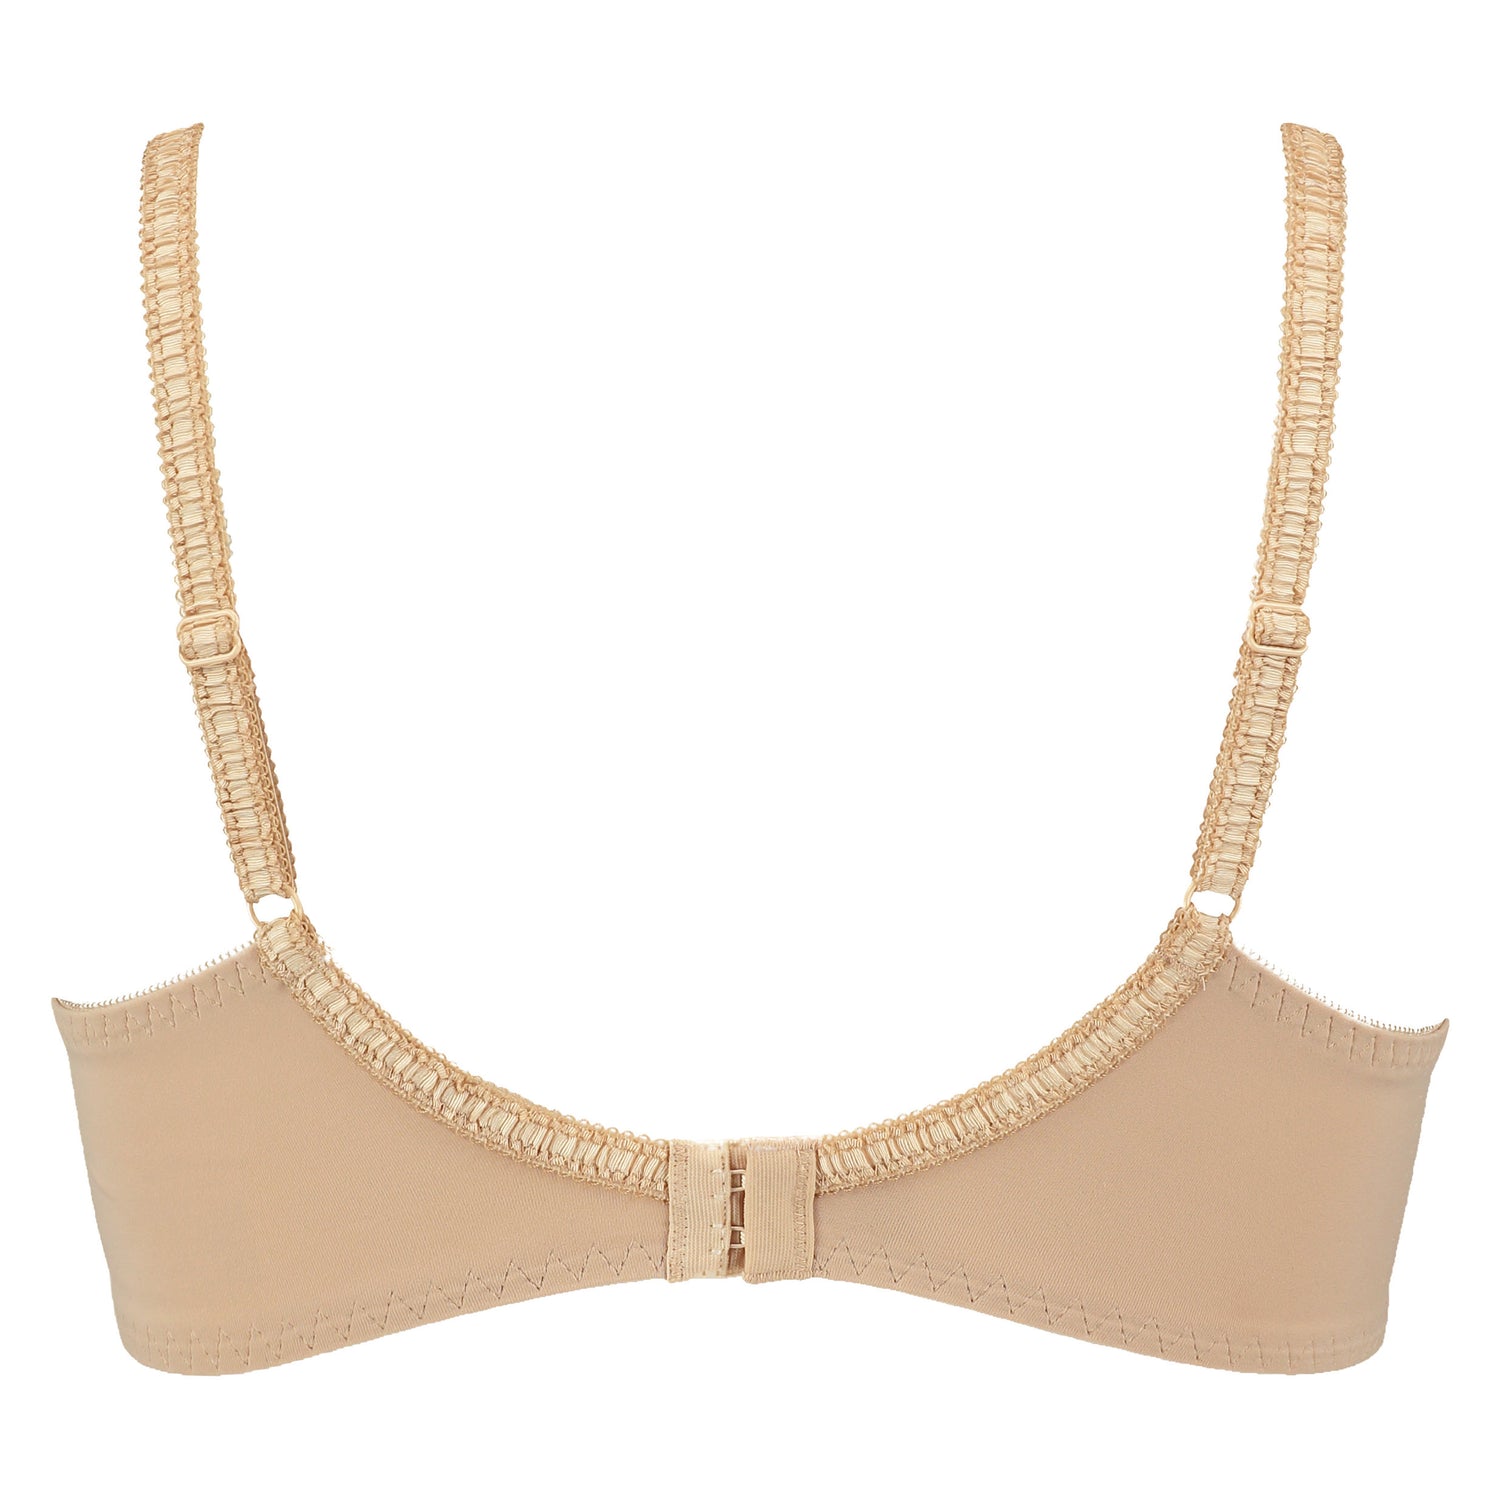 Diva Bra Full Support In Different Cup Sizes_103831_Rugby Tan_02